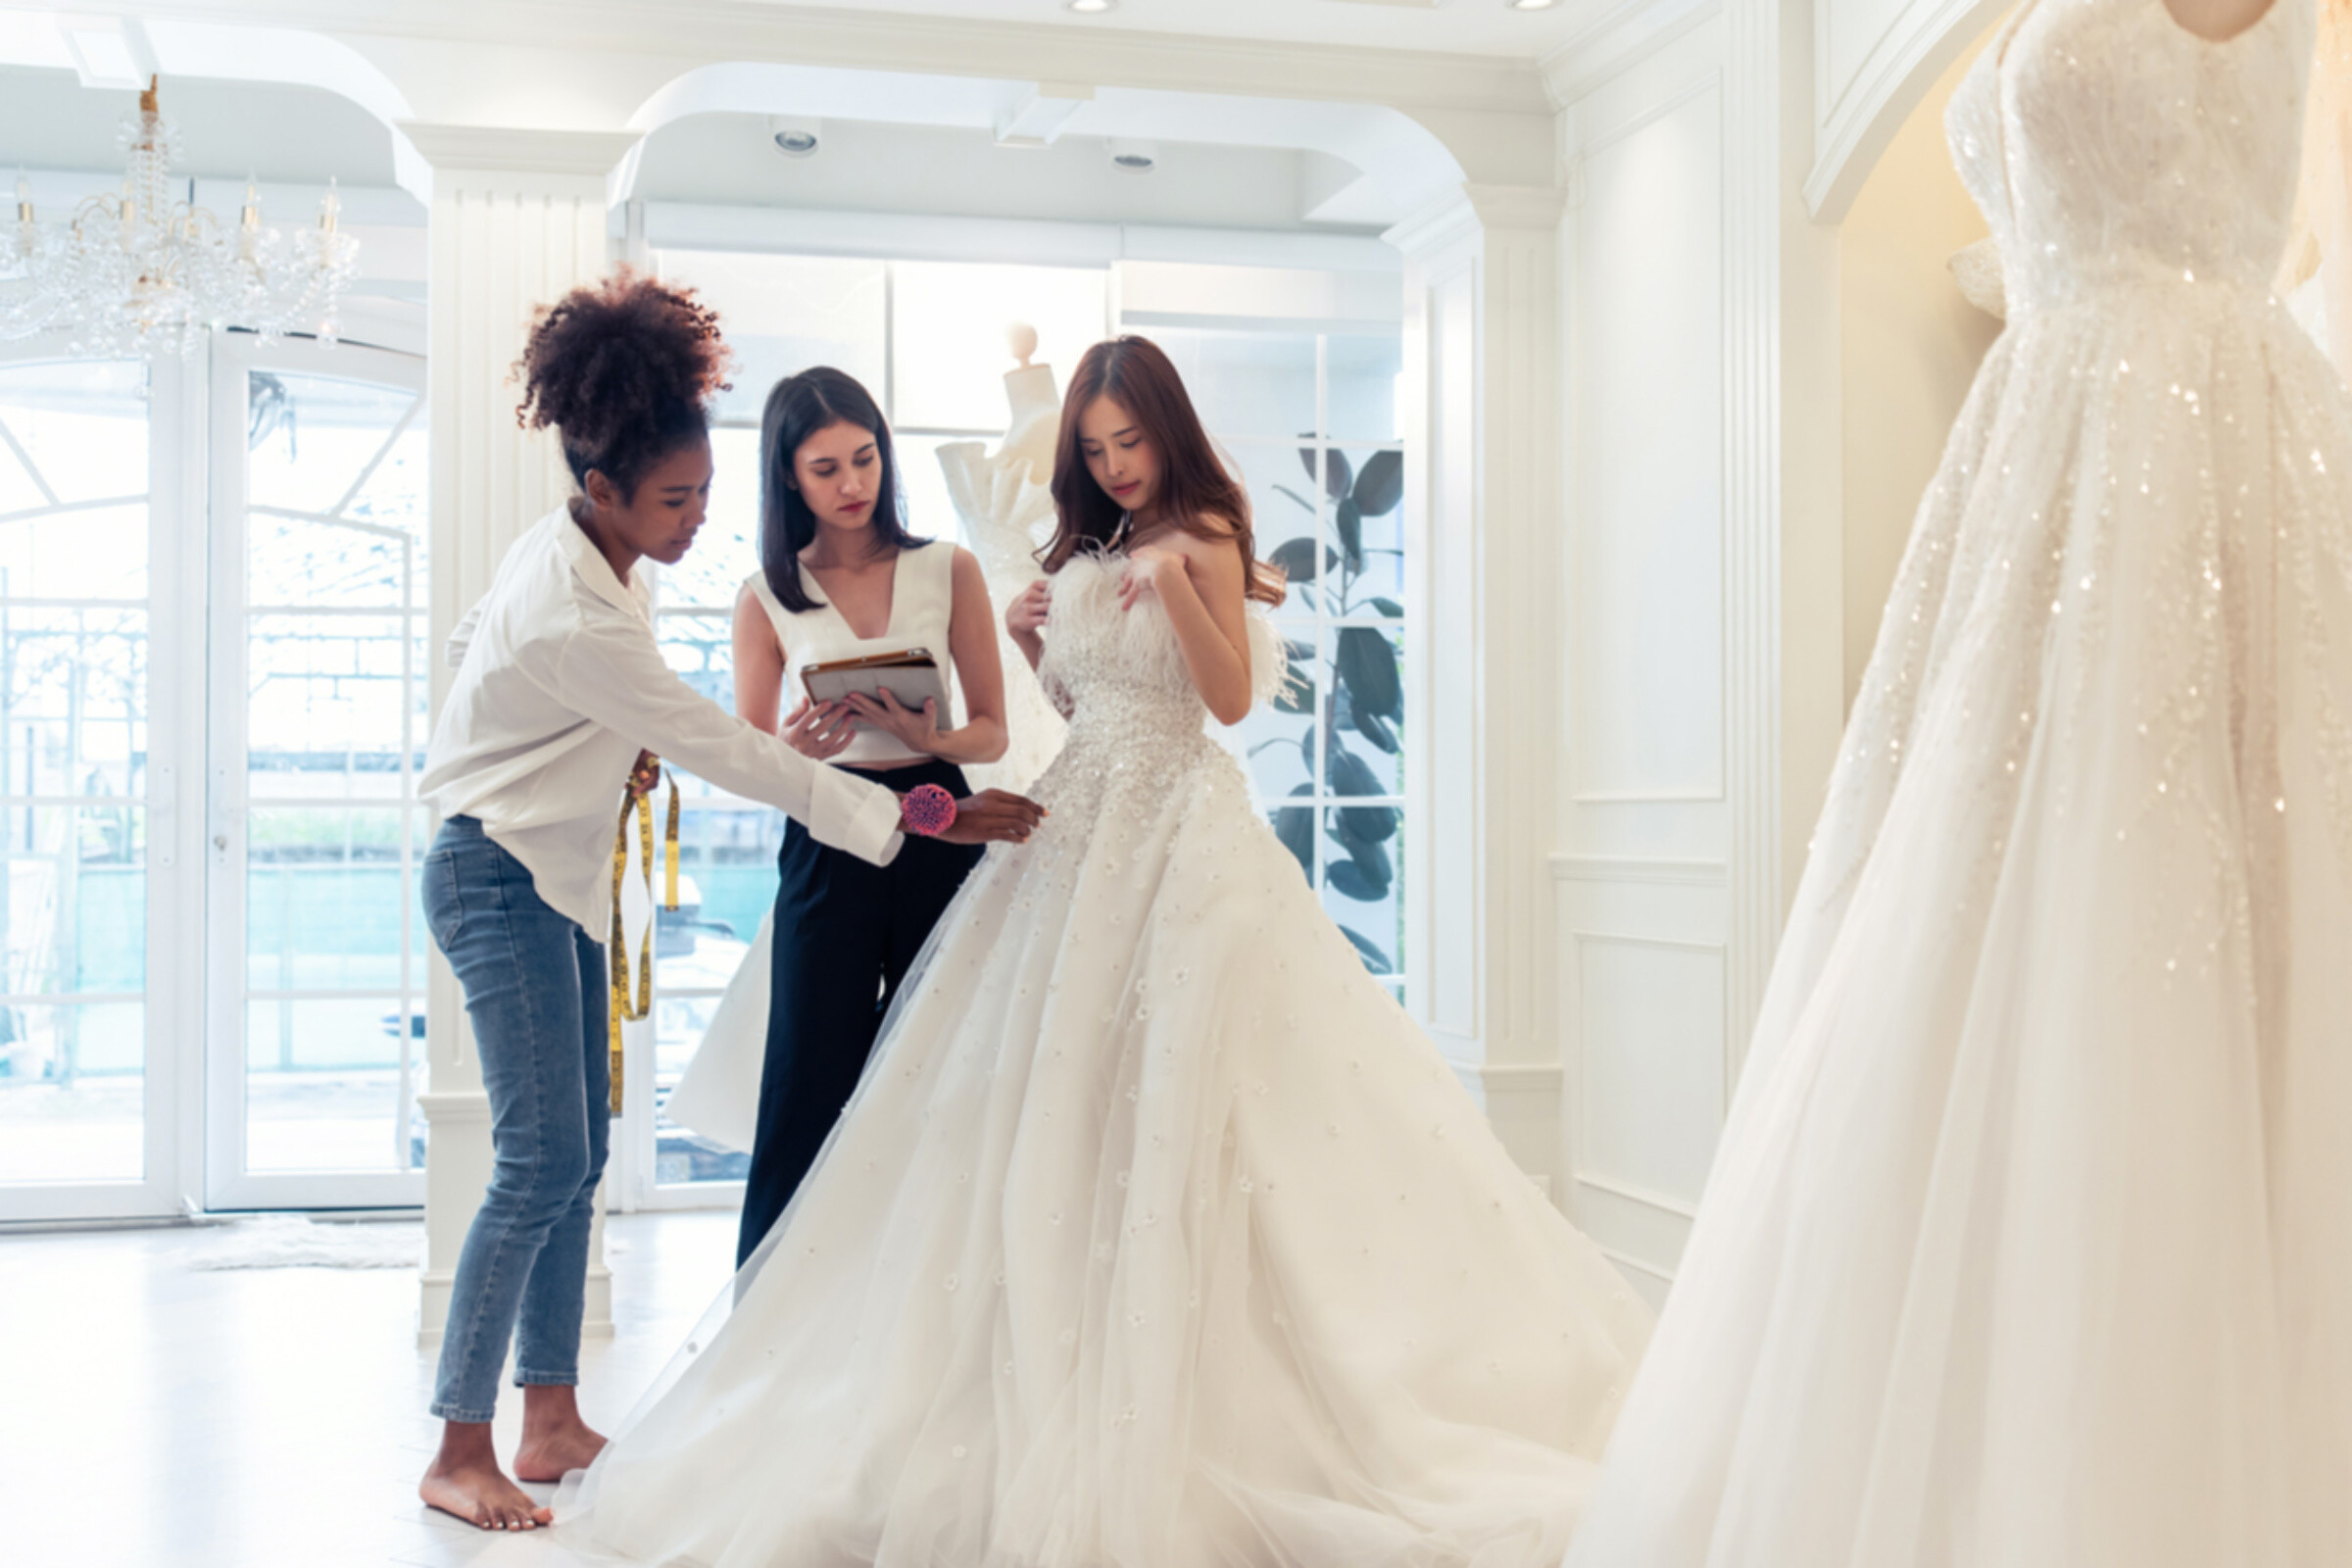 A bride-to-be fitting on a wedding dress and discussing it with her wedding planner and altier.